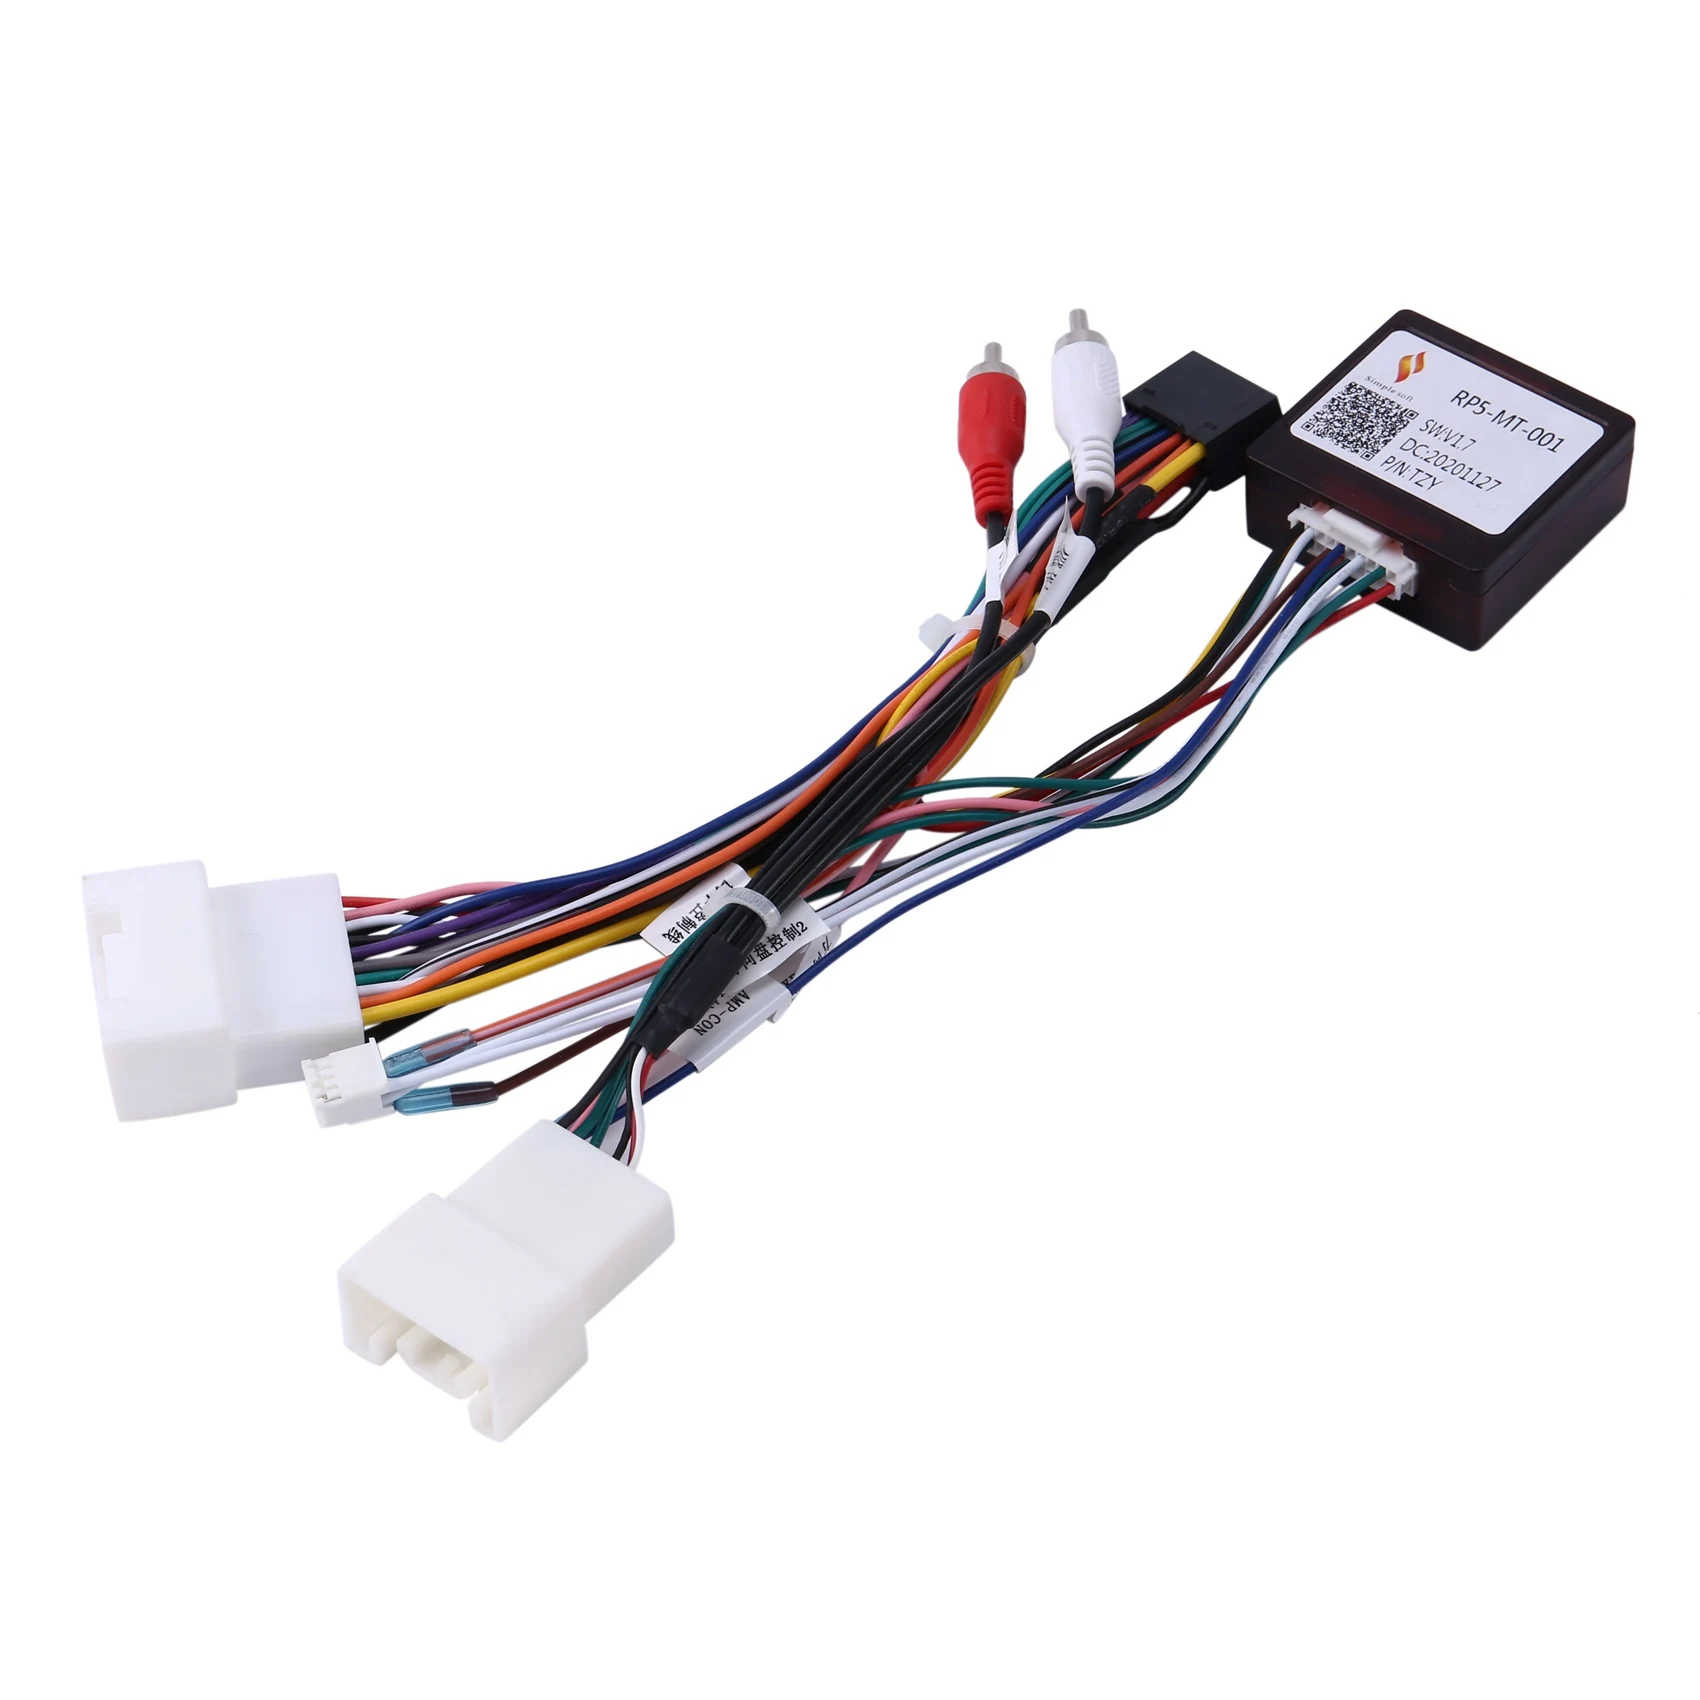 

Car 16Pin Power Wiring Harness Cable Adapter with Canbus for Mitsubishi Outlander Pajero Install Android Stereo Player